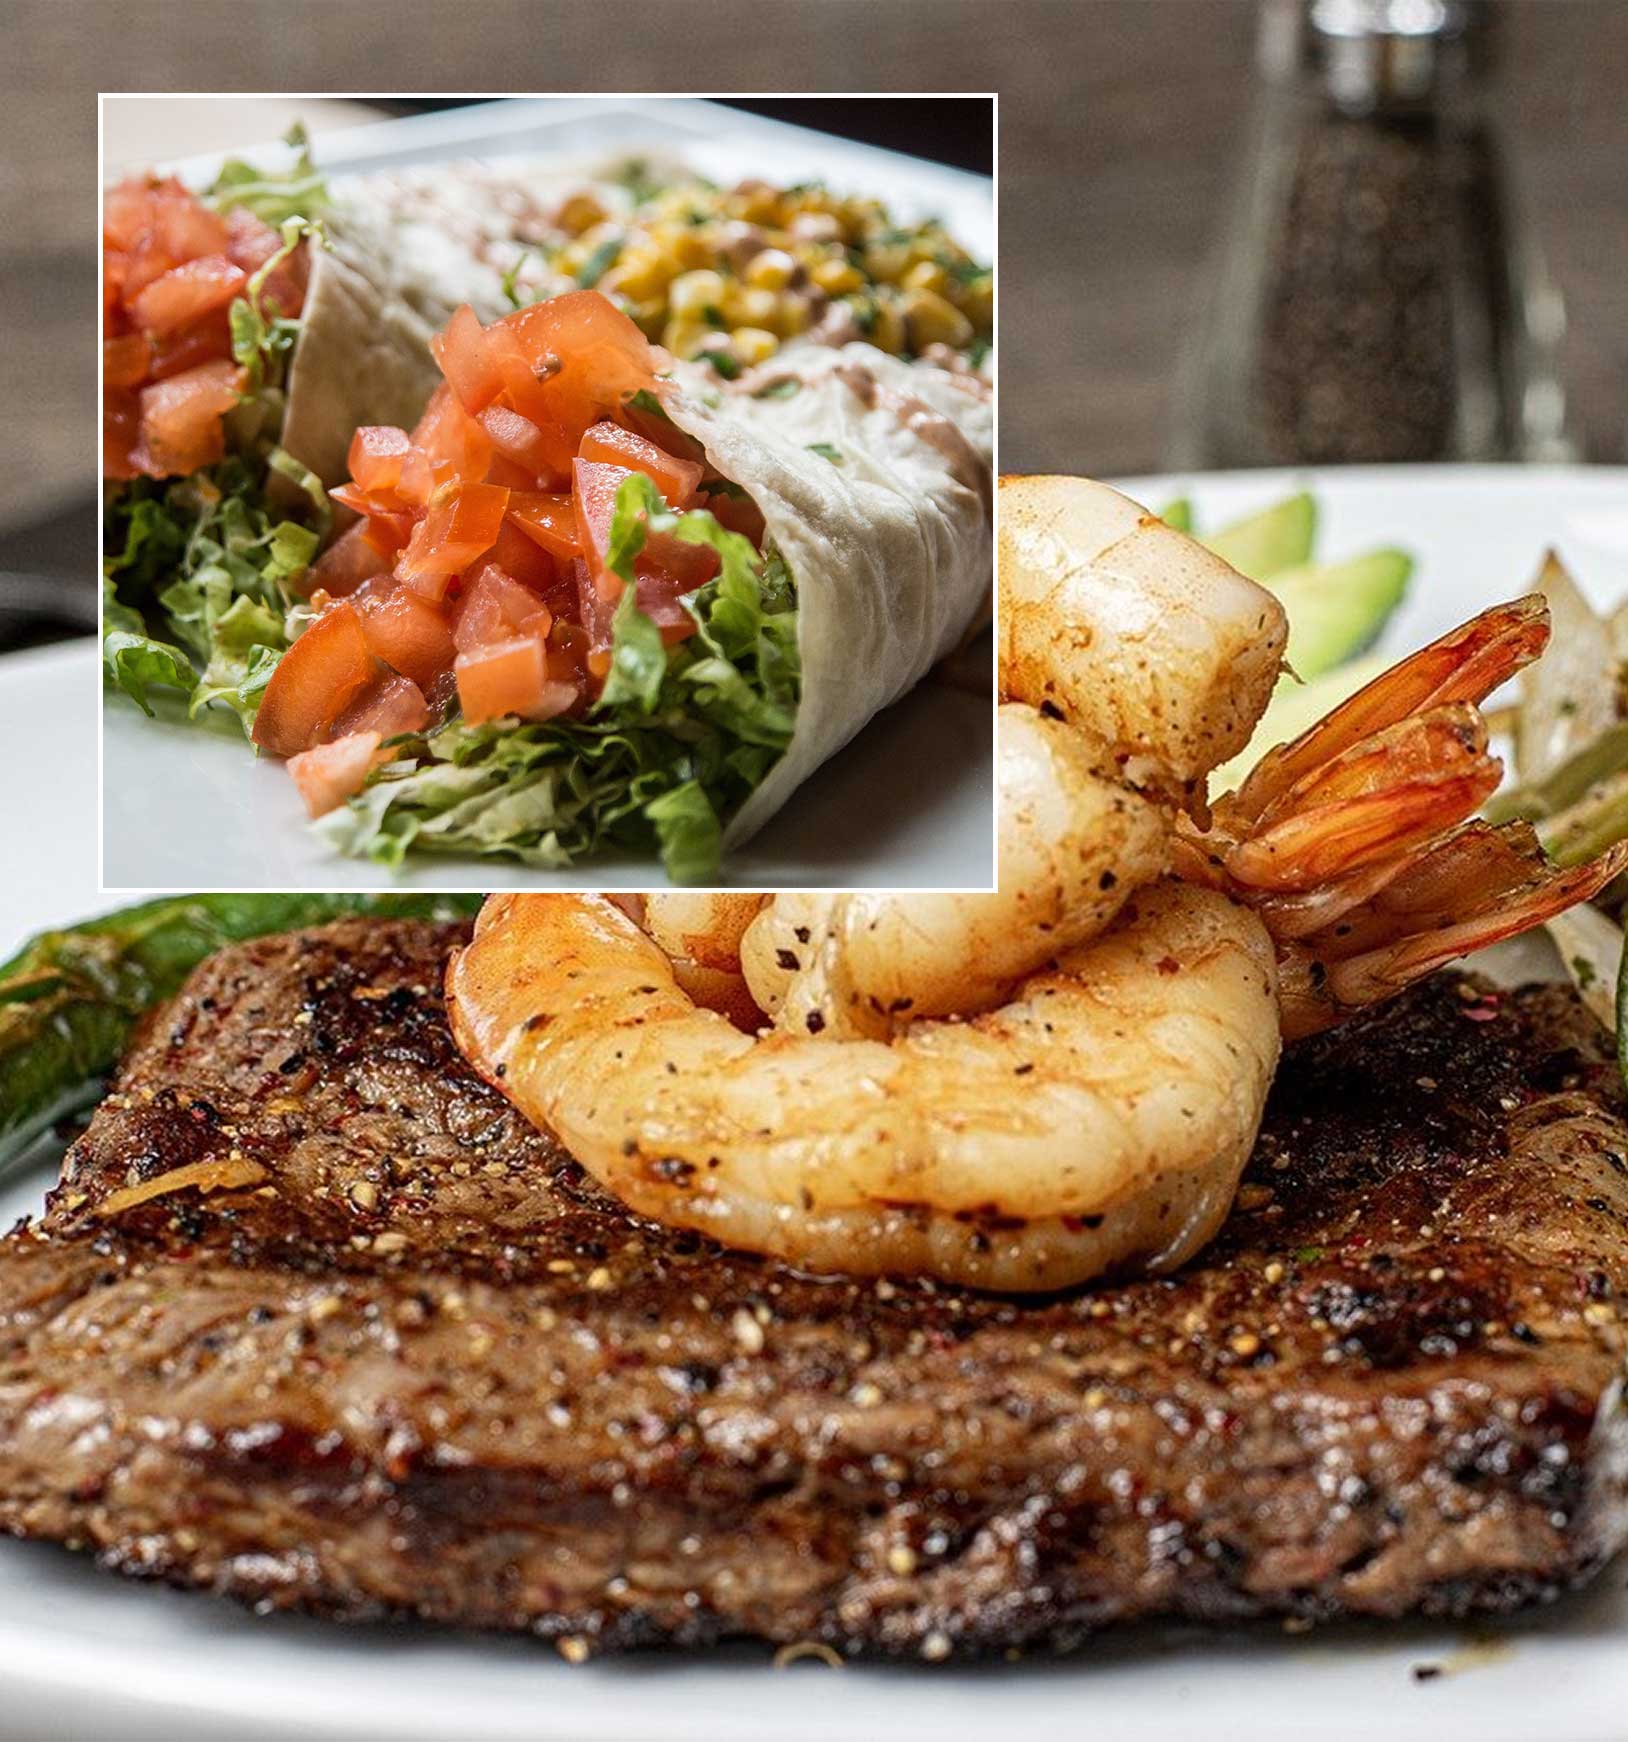 steak and shrimp, Mexican specialties